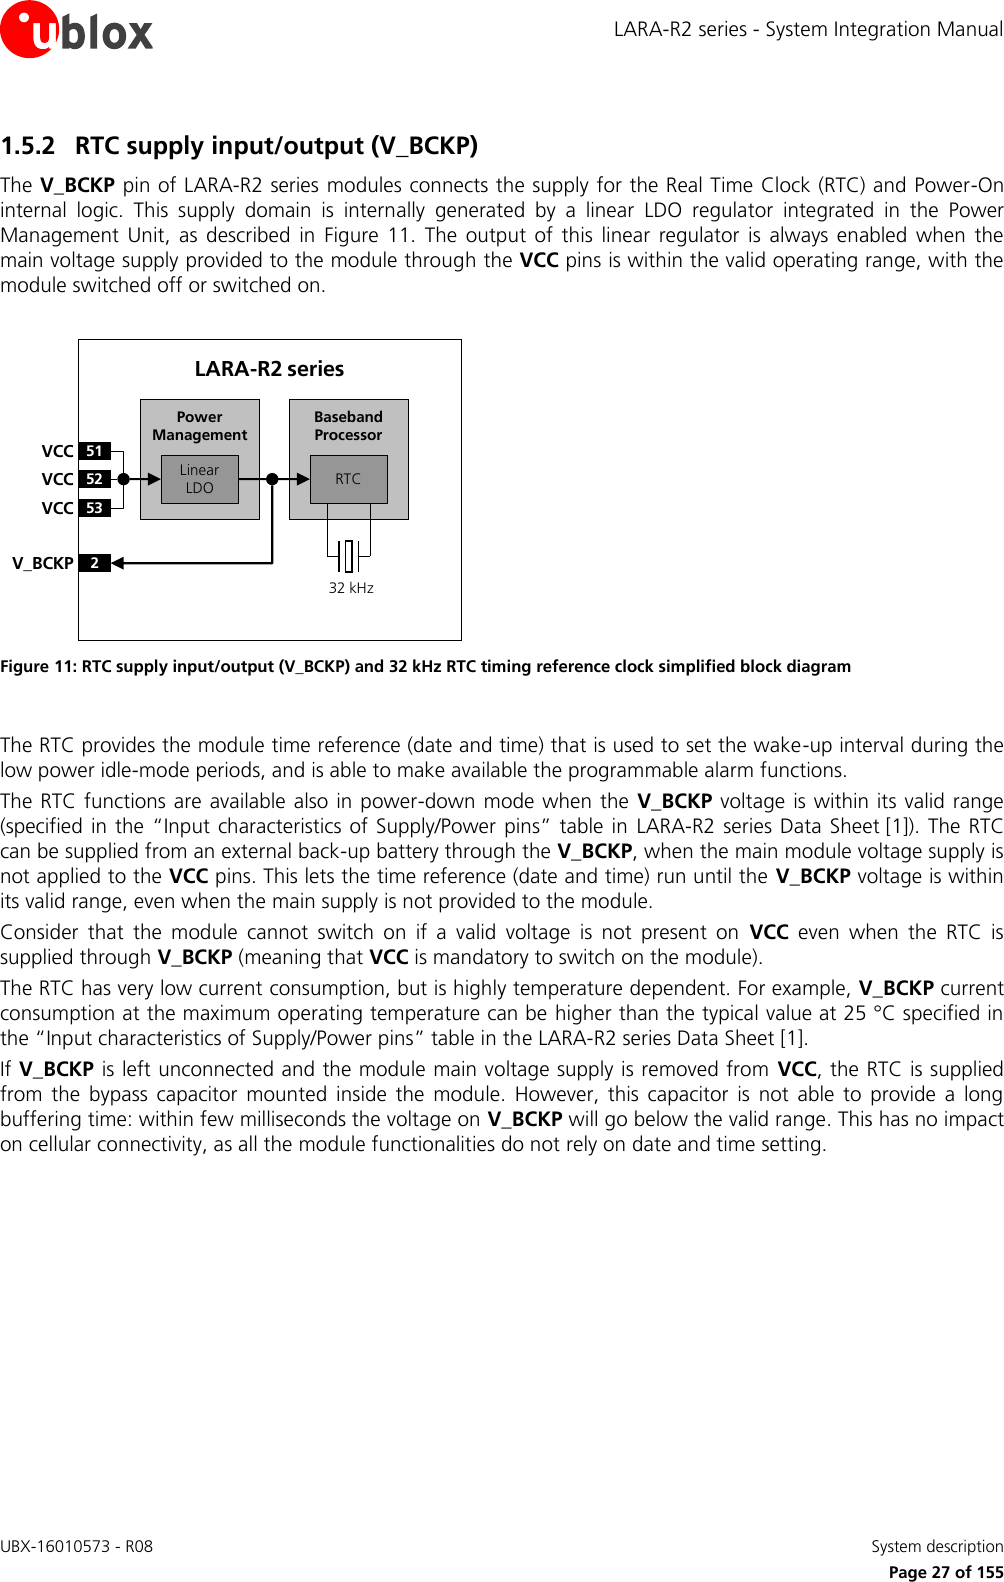 LARA-R2 series - System Integration Manual UBX-16010573 - R08    System description     Page 27 of 155 1.5.2 RTC supply input/output (V_BCKP) The V_BCKP pin of LARA-R2 series modules connects the supply for the Real Time Clock (RTC) and Power-On internal  logic.  This  supply  domain  is  internally  generated  by  a  linear  LDO  regulator  integrated  in  the  Power Management  Unit,  as  described  in  Figure  11.  The  output  of  this  linear  regulator  is  always  enabled  when  the main voltage supply provided to the module through the VCC pins is within the valid operating range, with the module switched off or switched on.  Baseband Processor51VCC52VCC53VCC2V_BCKPLinear LDO RTCPower ManagementLARA-R2 series32 kHz Figure 11: RTC supply input/output (V_BCKP) and 32 kHz RTC timing reference clock simplified block diagram  The RTC provides the module time reference (date and time) that is used to set the wake-up interval during the low power idle-mode periods, and is able to make available the programmable alarm functions. The RTC functions are available also in power-down mode  when  the  V_BCKP  voltage is within its valid range (specified in  the “Input characteristics of Supply/Power  pins” table in  LARA-R2 series Data Sheet [1]).  The  RTC can be supplied from an external back-up battery through the V_BCKP, when the main module voltage supply is not applied to the VCC pins. This lets the time reference (date and time) run until the V_BCKP voltage is within its valid range, even when the main supply is not provided to the module. Consider  that  the  module  cannot  switch  on  if  a  valid  voltage  is  not  present  on  VCC  even  when  the  RTC  is supplied through V_BCKP (meaning that VCC is mandatory to switch on the module). The RTC has very low current consumption, but is highly temperature dependent. For example, V_BCKP current consumption at the maximum operating temperature can be higher than the typical value at 25 °C specified in the “Input characteristics of Supply/Power pins” table in the LARA-R2 series Data Sheet [1]. If V_BCKP is left unconnected and the module main voltage supply is removed from  VCC, the RTC is supplied from  the  bypass  capacitor  mounted  inside  the  module.  However,  this  capacitor  is  not  able  to  provide  a  long buffering time: within few milliseconds the voltage on V_BCKP will go below the valid range. This has no impact on cellular connectivity, as all the module functionalities do not rely on date and time setting.  